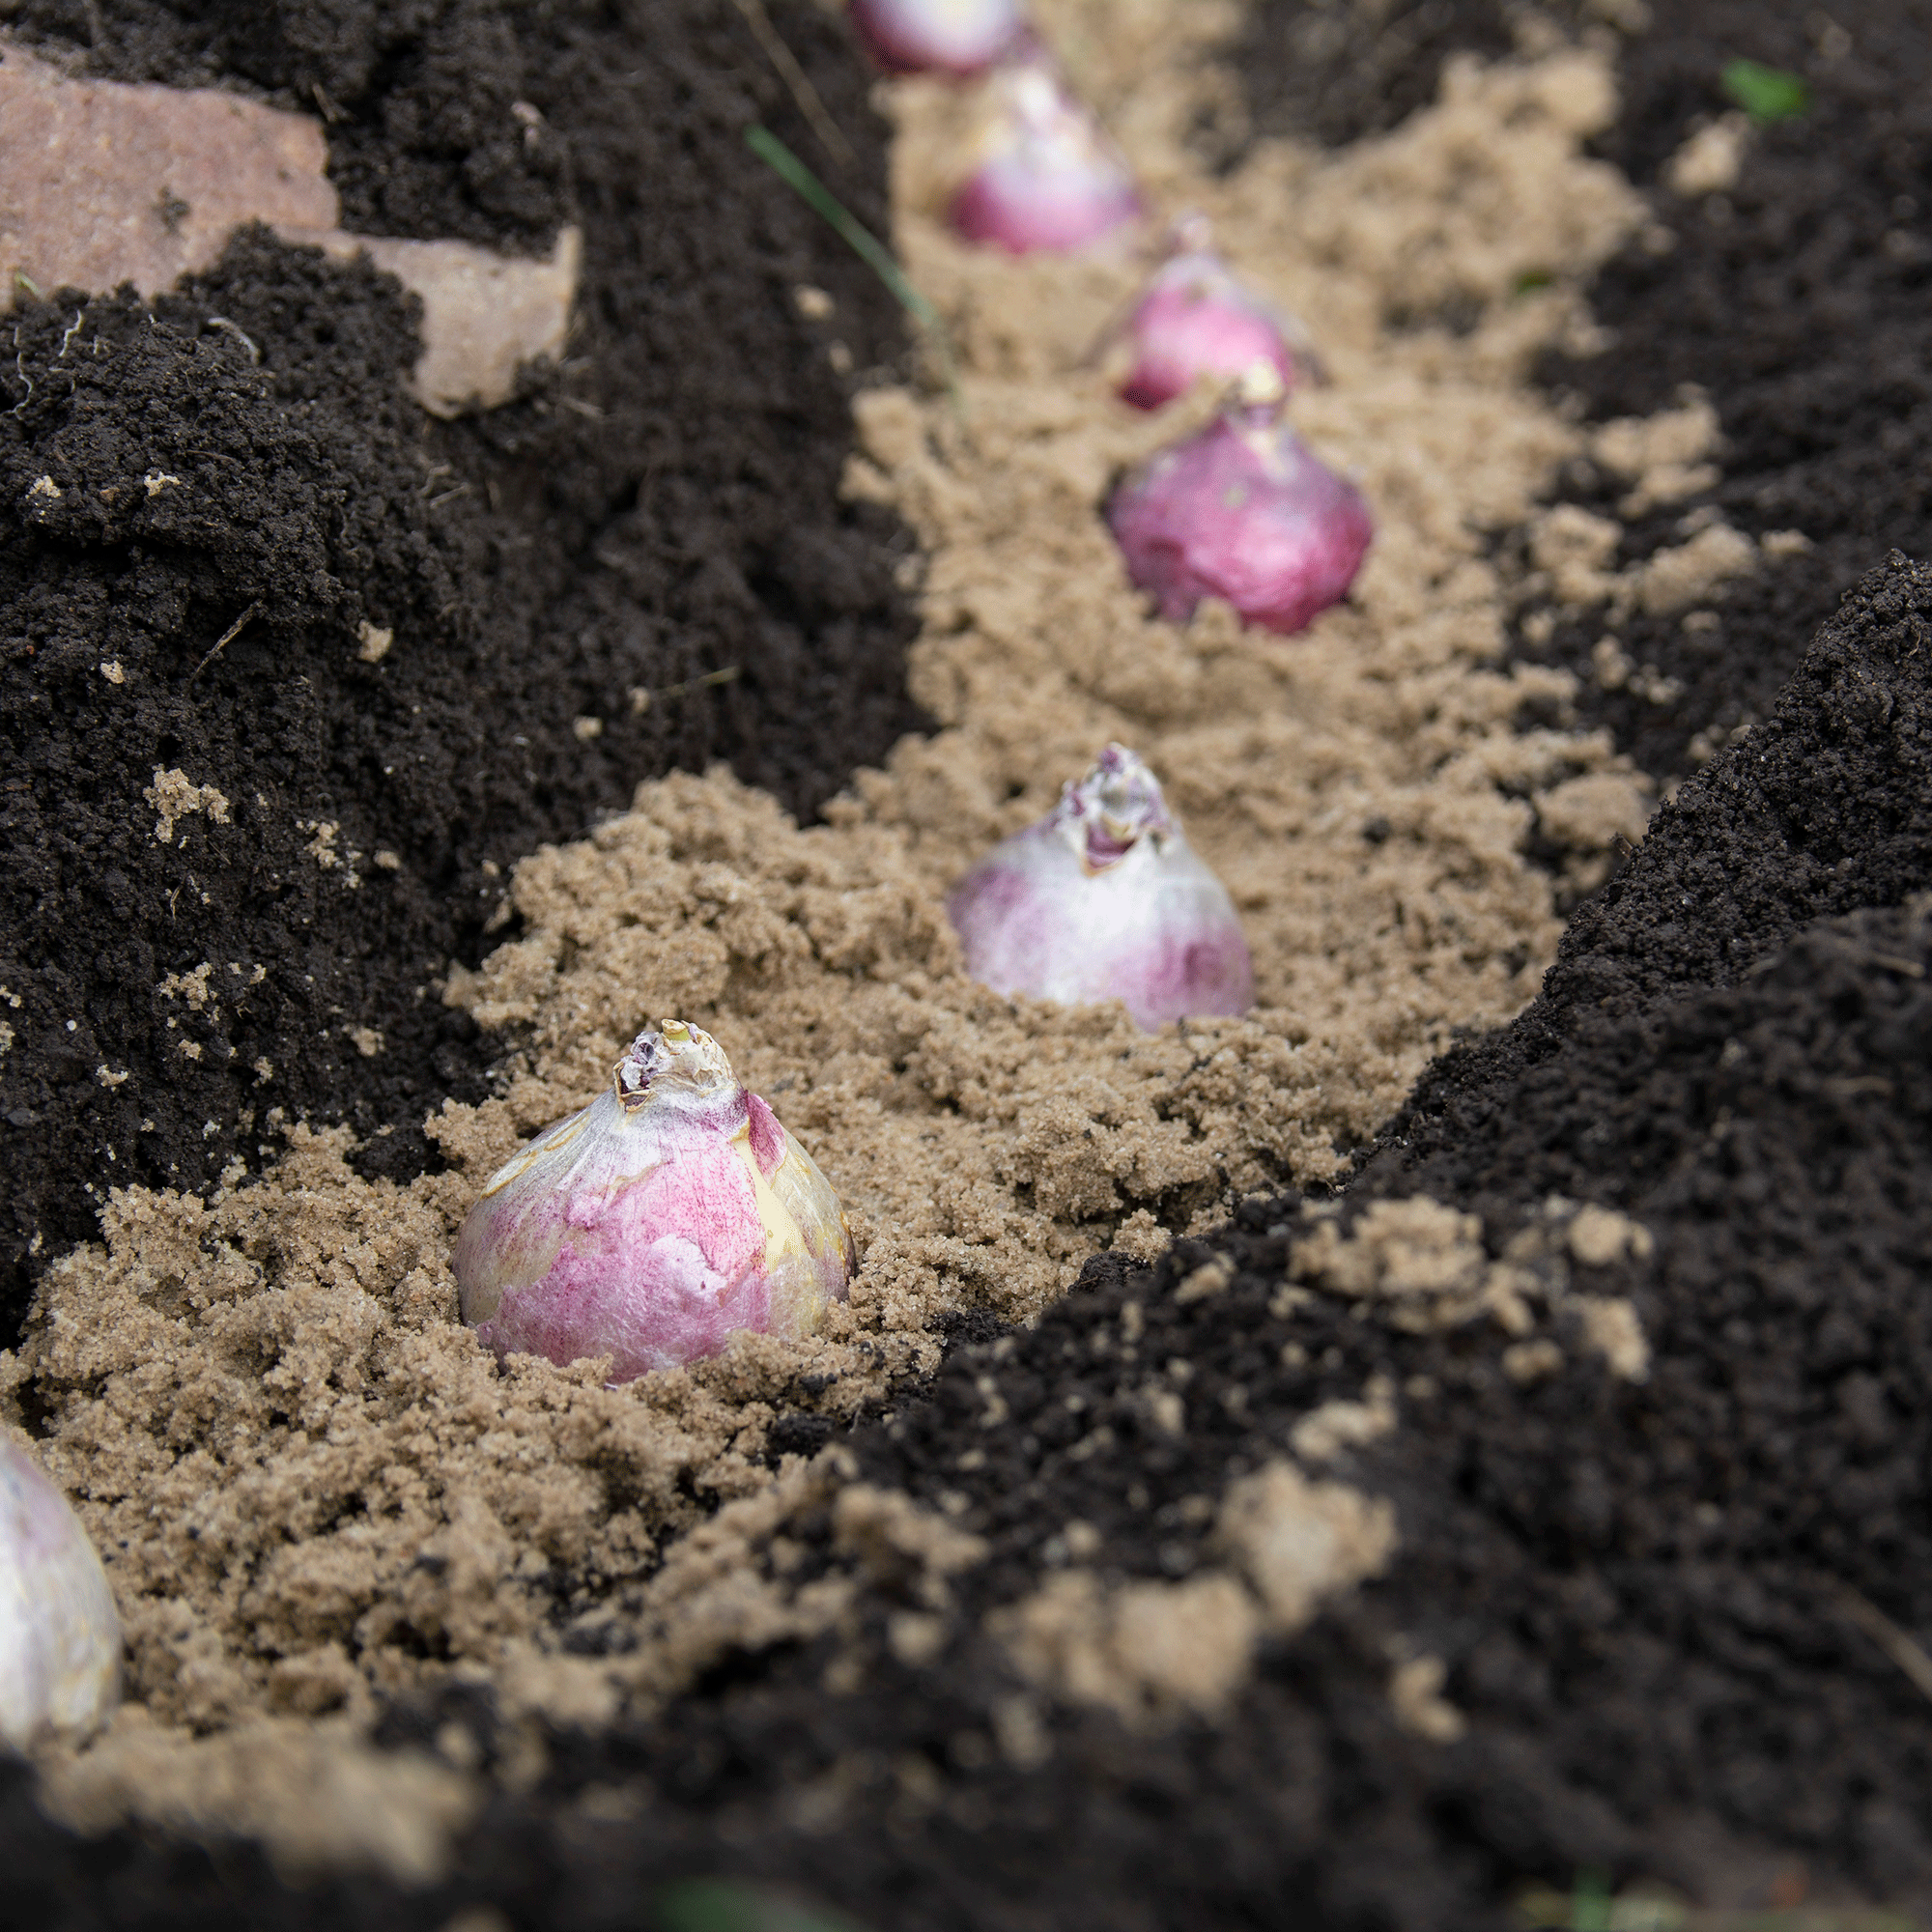 How to plant bulbs - the proper technique for planting spring bulbs in borders and containers